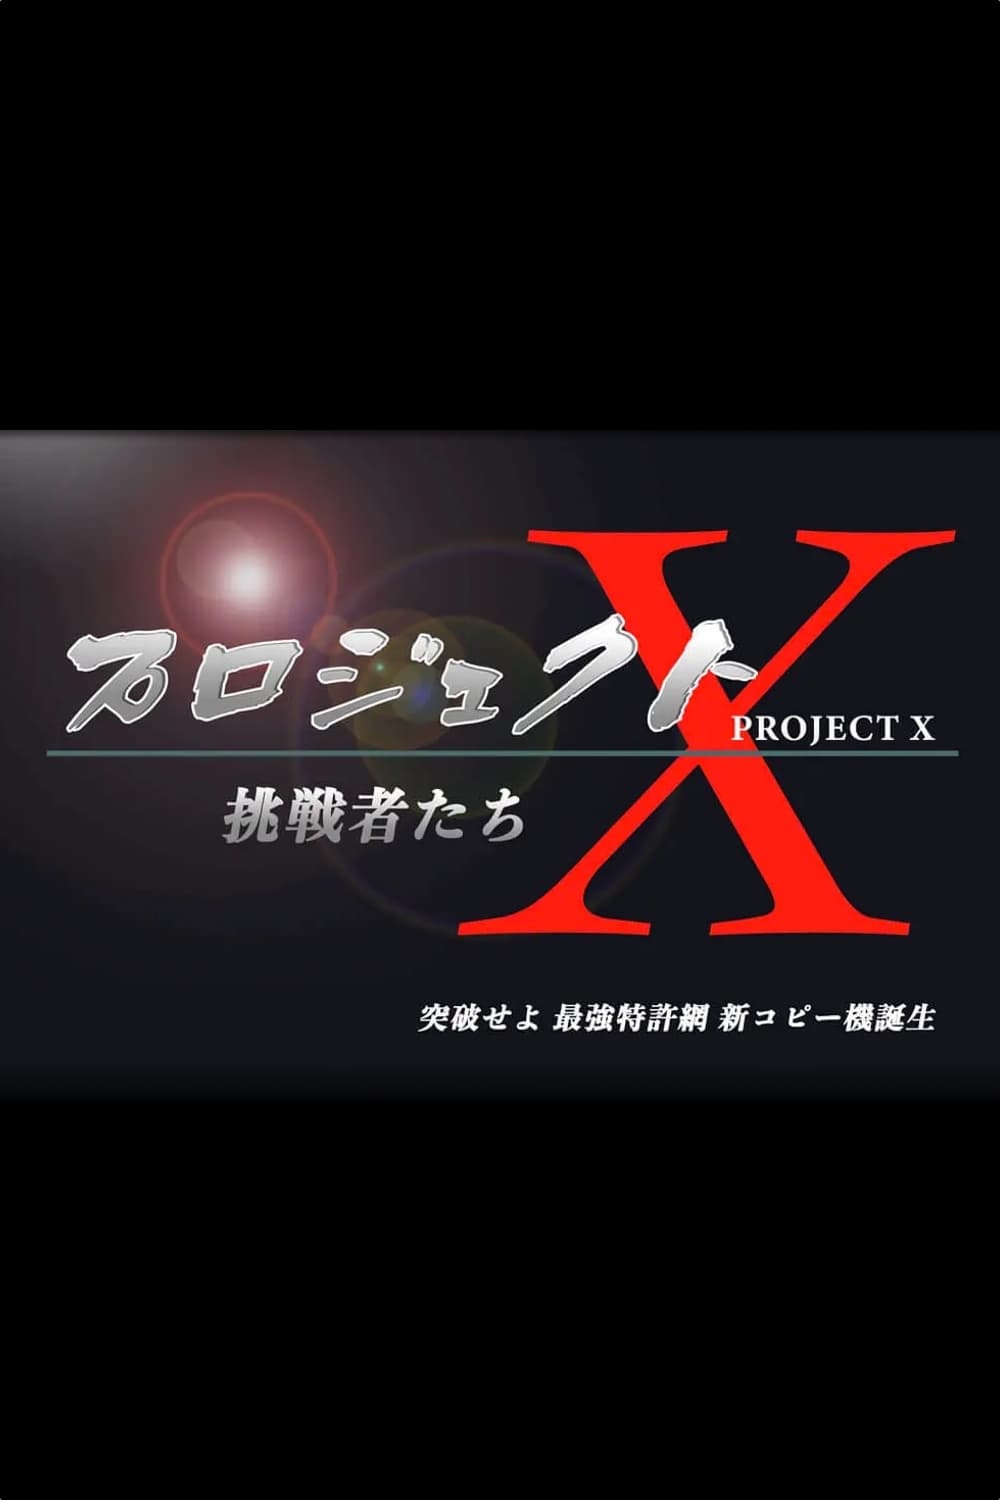 PROJECT X 〜Challengers〜